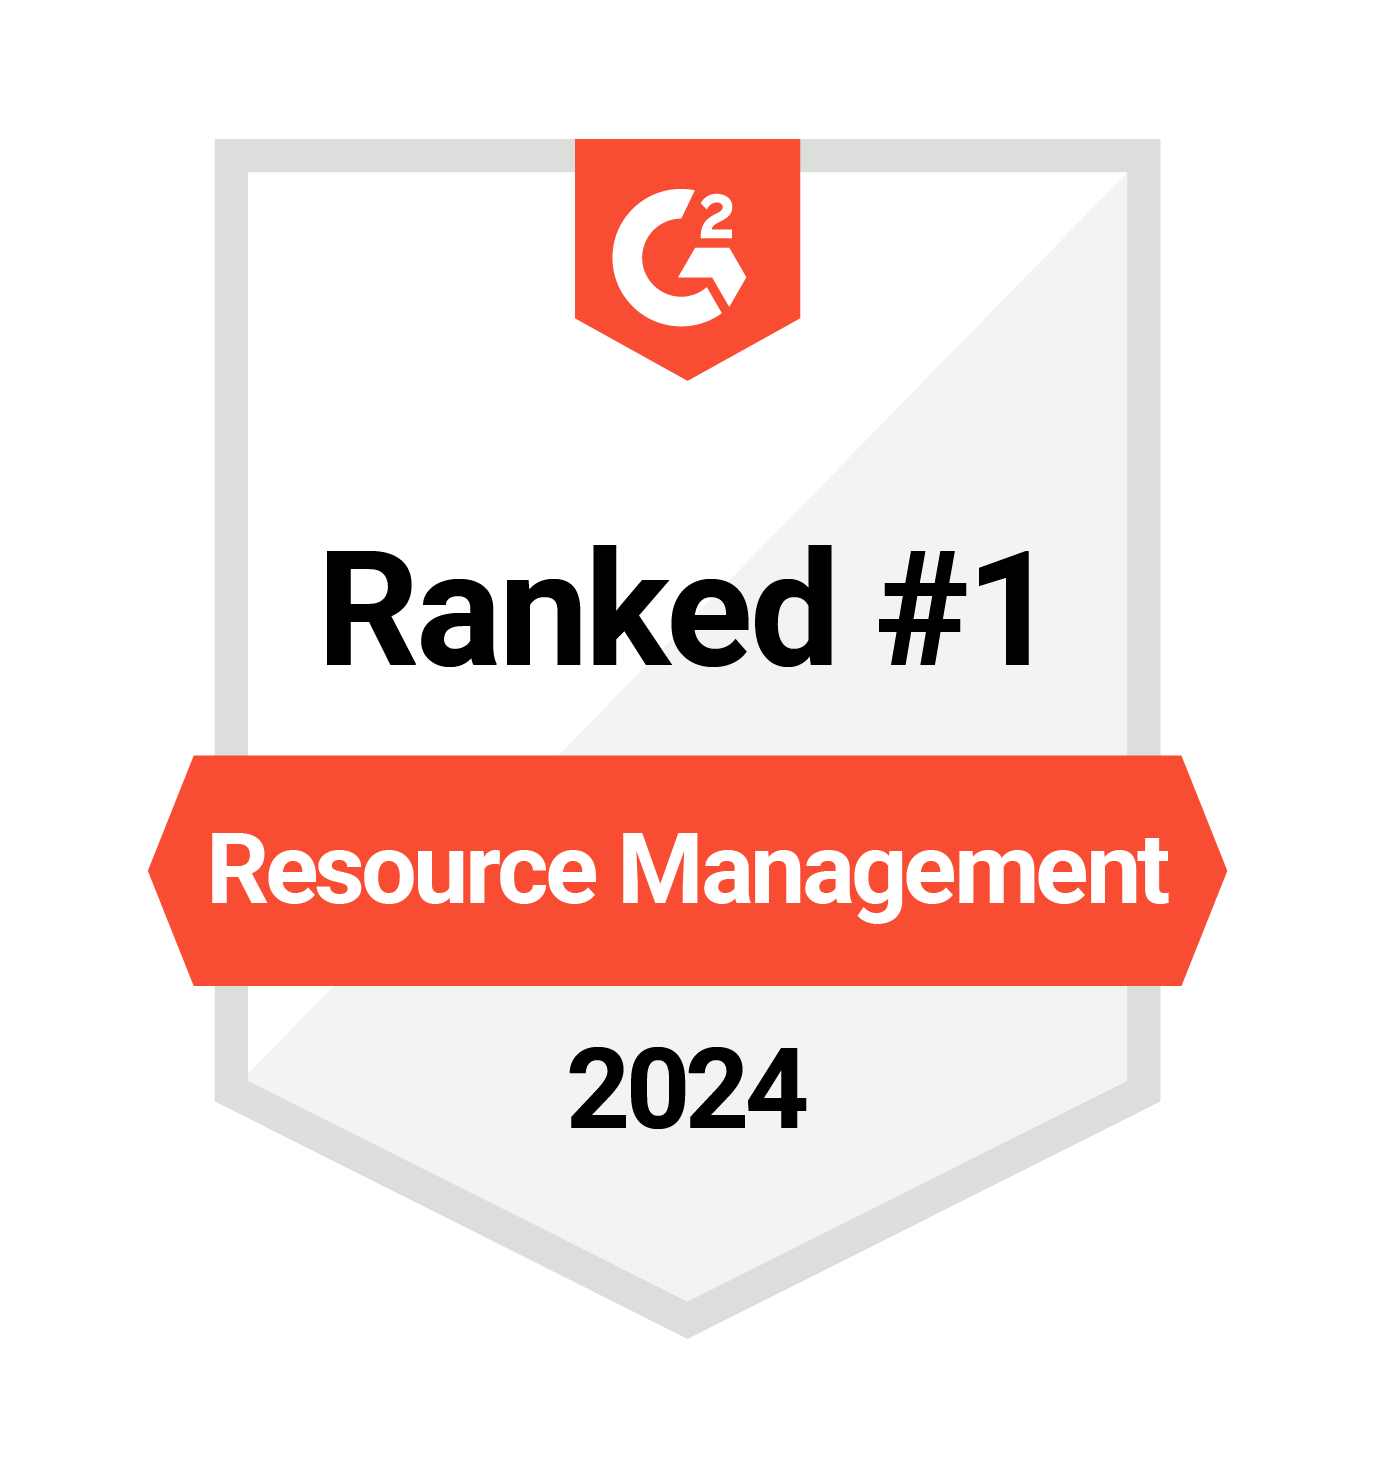 G2 Ranked #1 in Resource Management Management